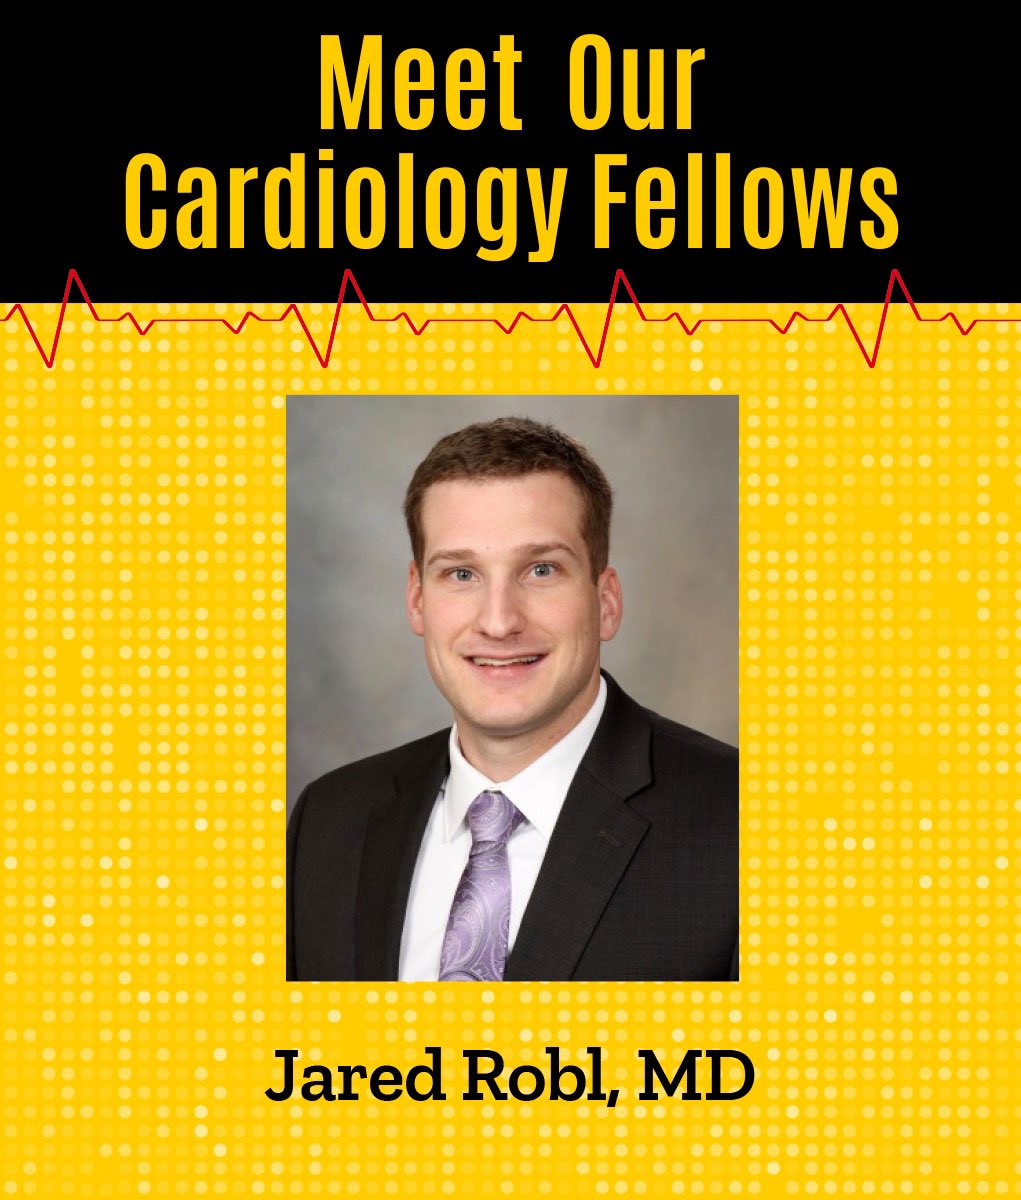 @JaredRobl is a former @IntMedatIowa resident who enjoys world history and is planning on an Interventional Cardiology career @SCAI #CardioTwitter. internalmedicineiowa.org/2022/11/28/mee…